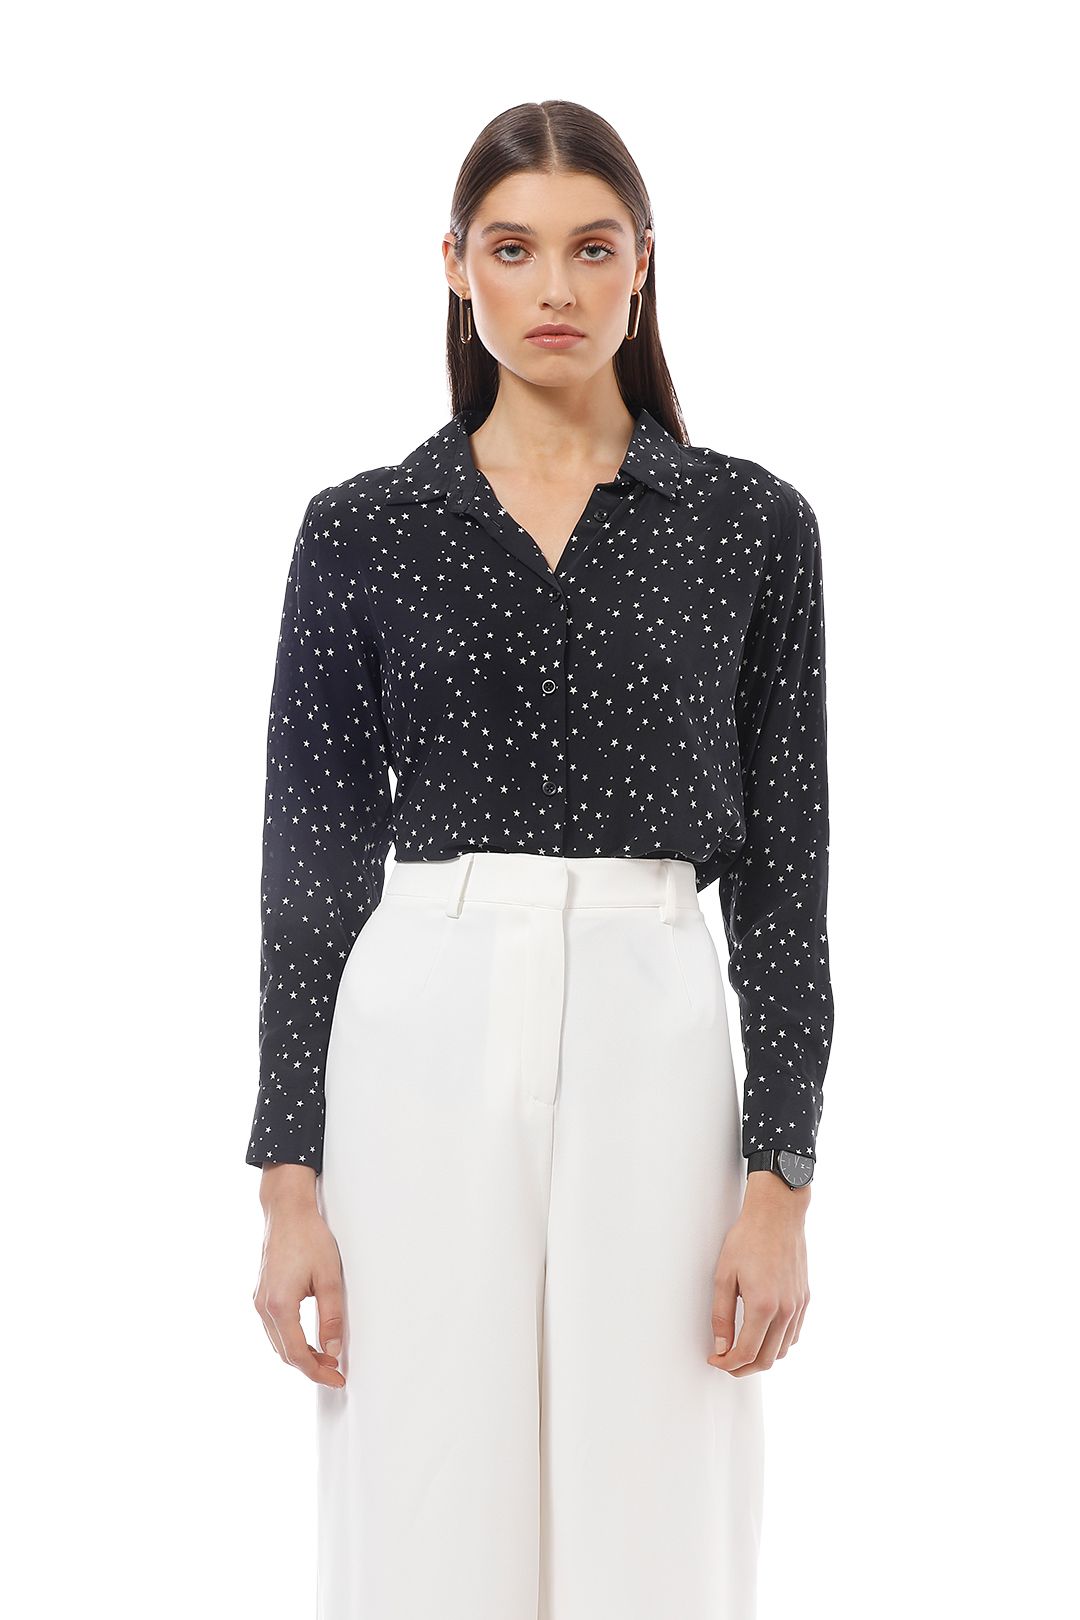 Starry Starry Night Blouse by The Fable for Hire